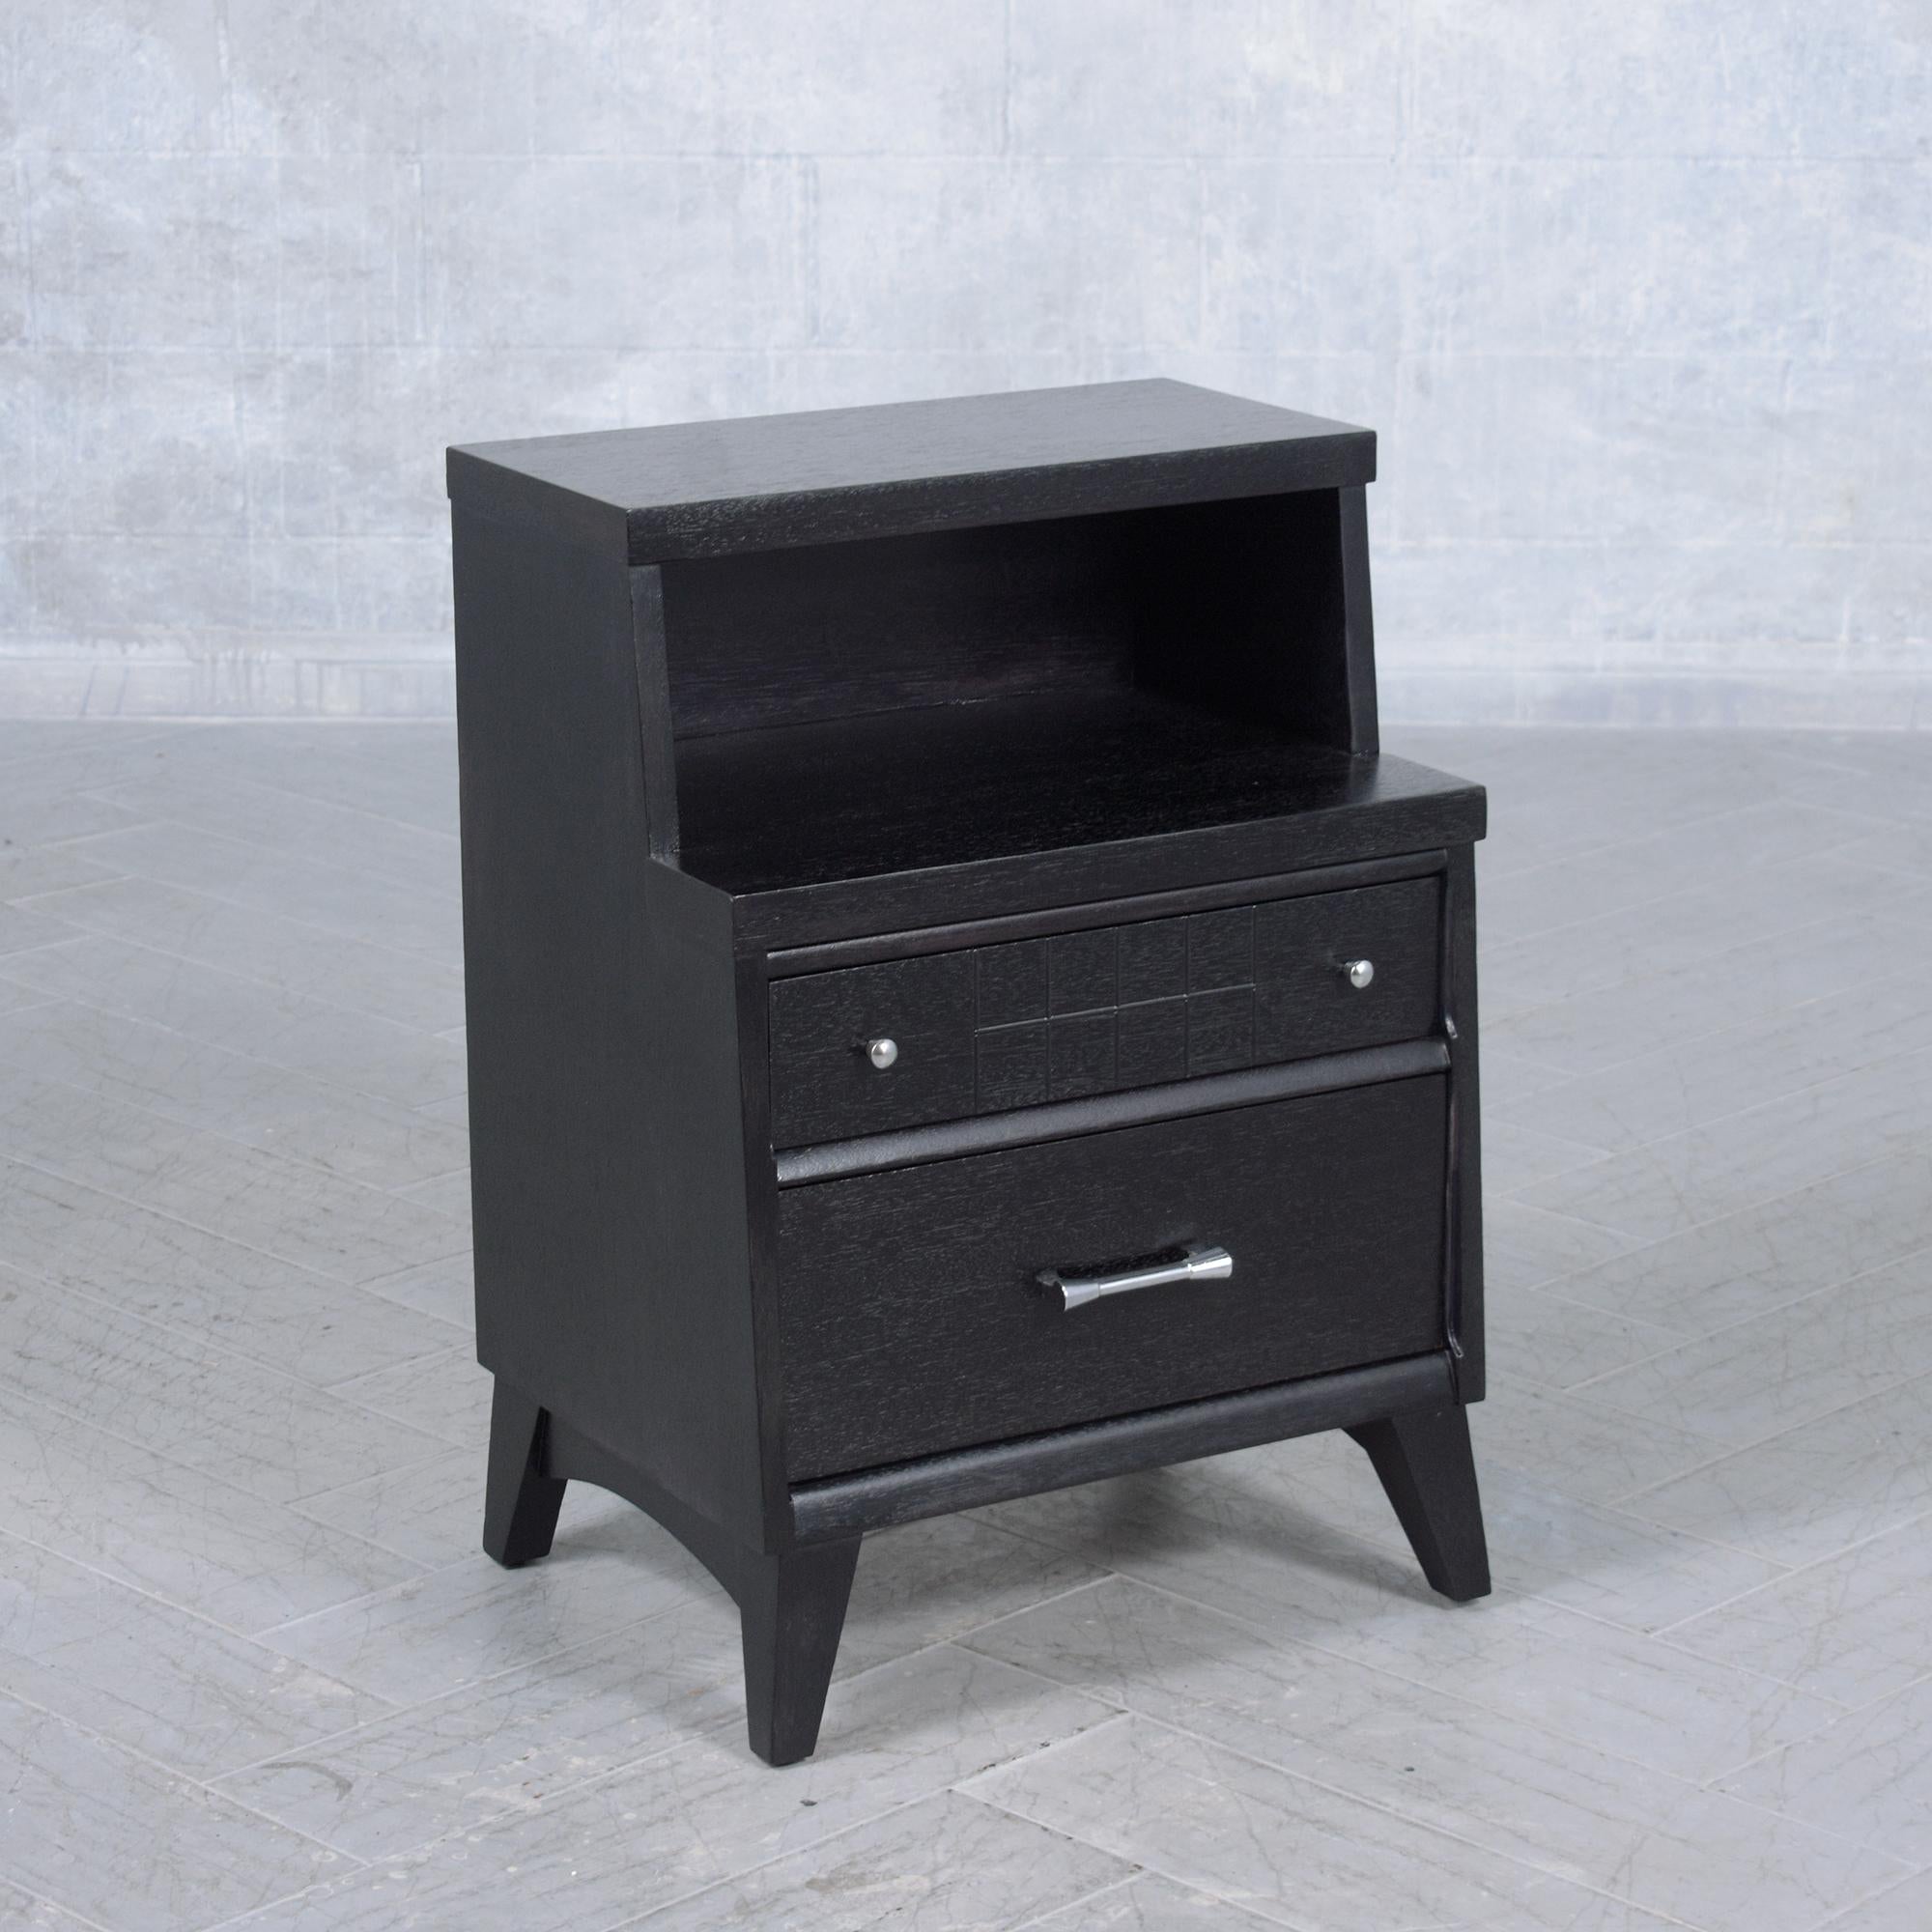 Vintage Mid-Century Modern Nightstands with Ebonized Finish and Chrome Hardware For Sale 4